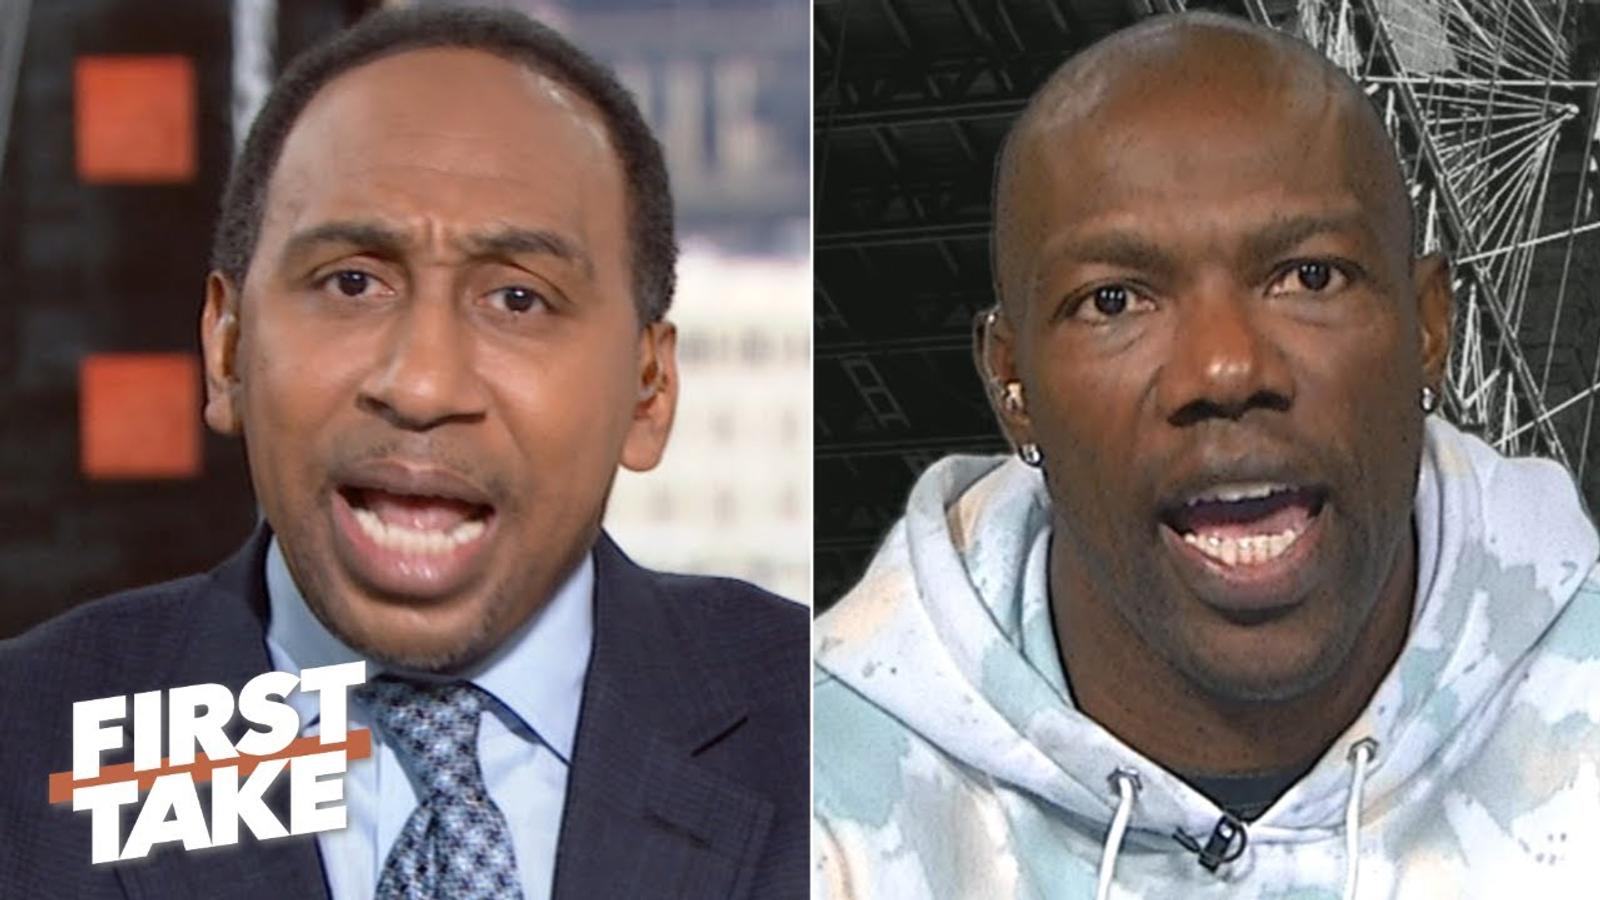 Stunning war of words between Stephen A. Smith and Terrell Owens 